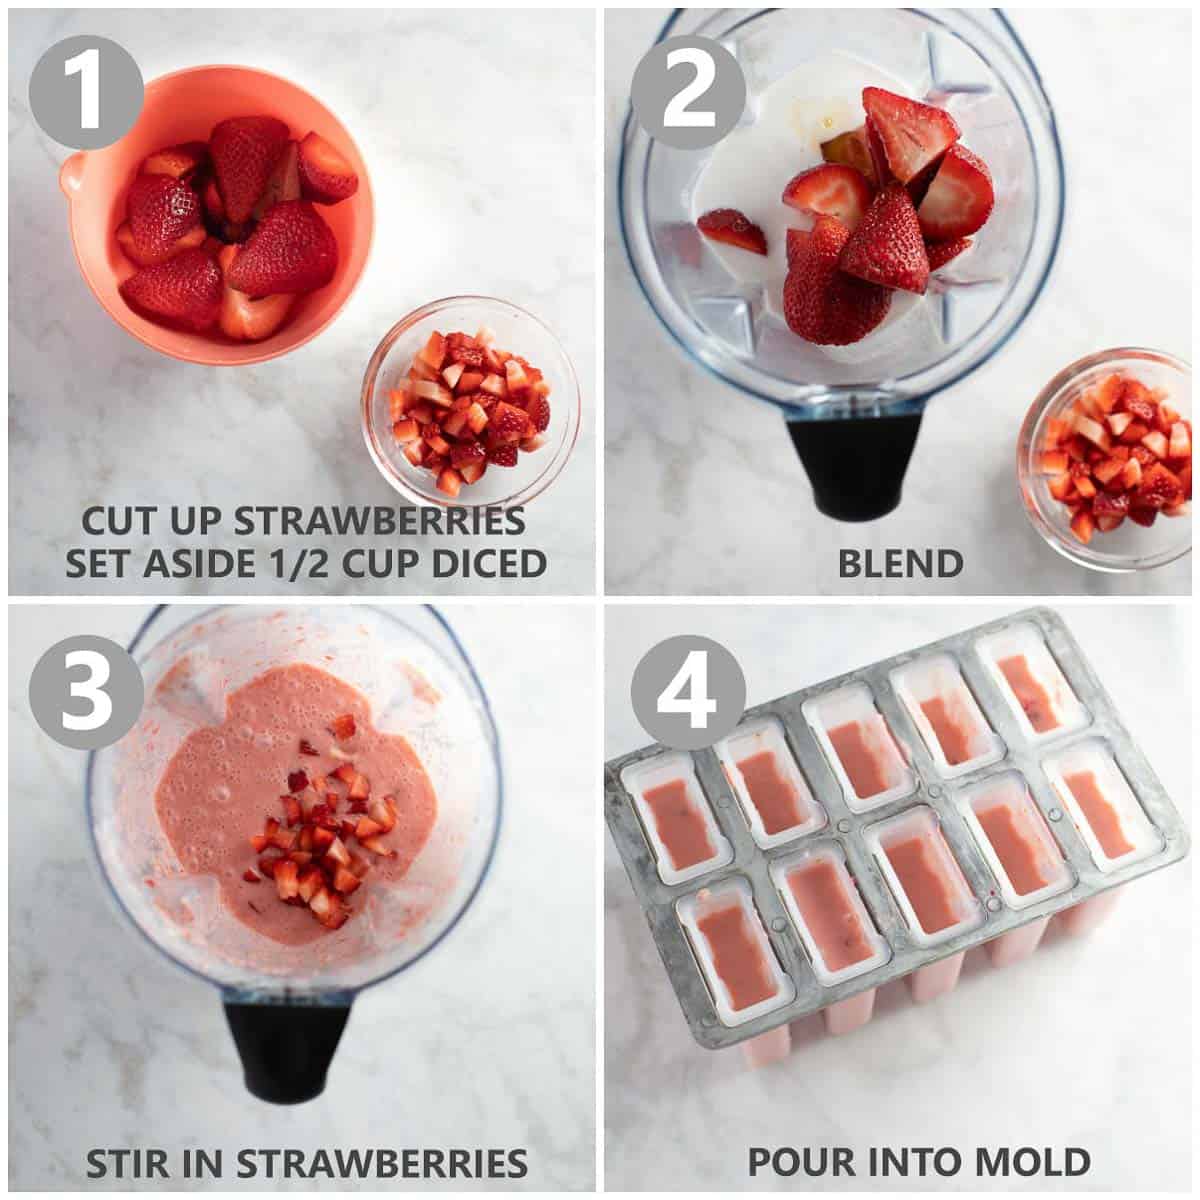 4 photo collage shows steps to make strawberry popsicle mixture in a blender